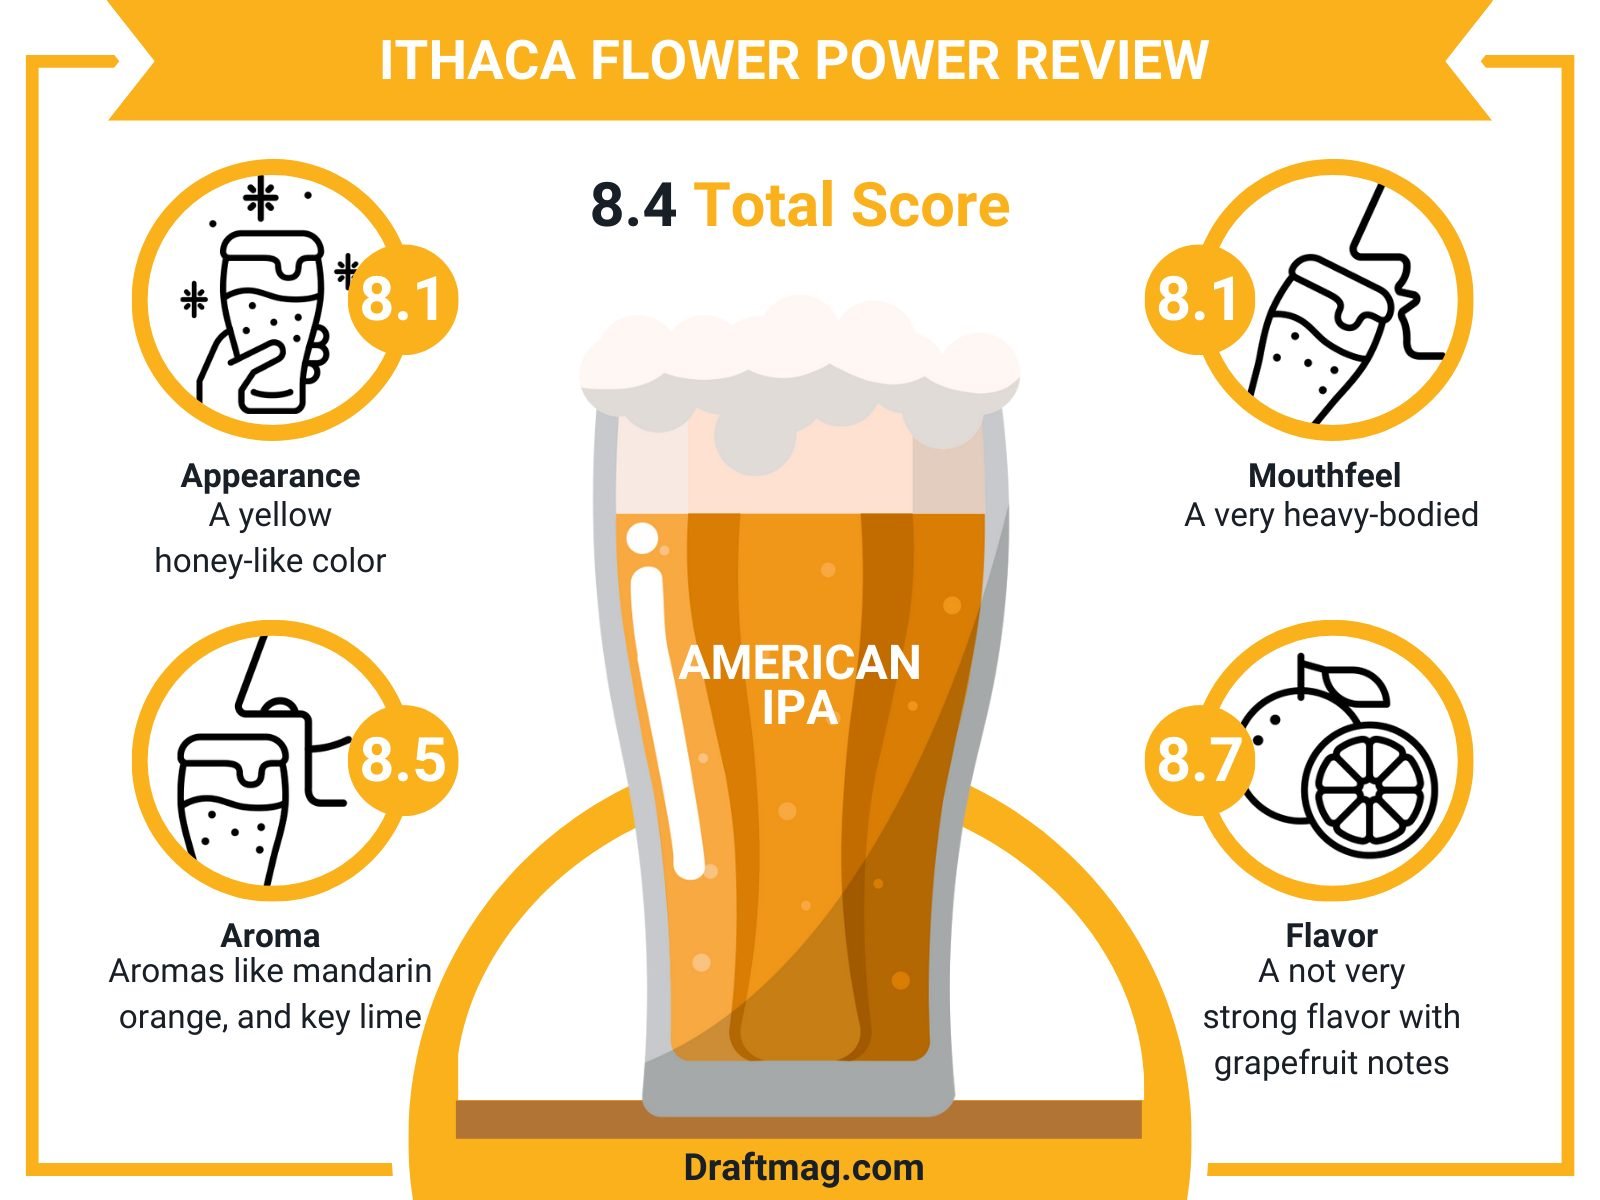 Ithaca Flower Power Review Infographic